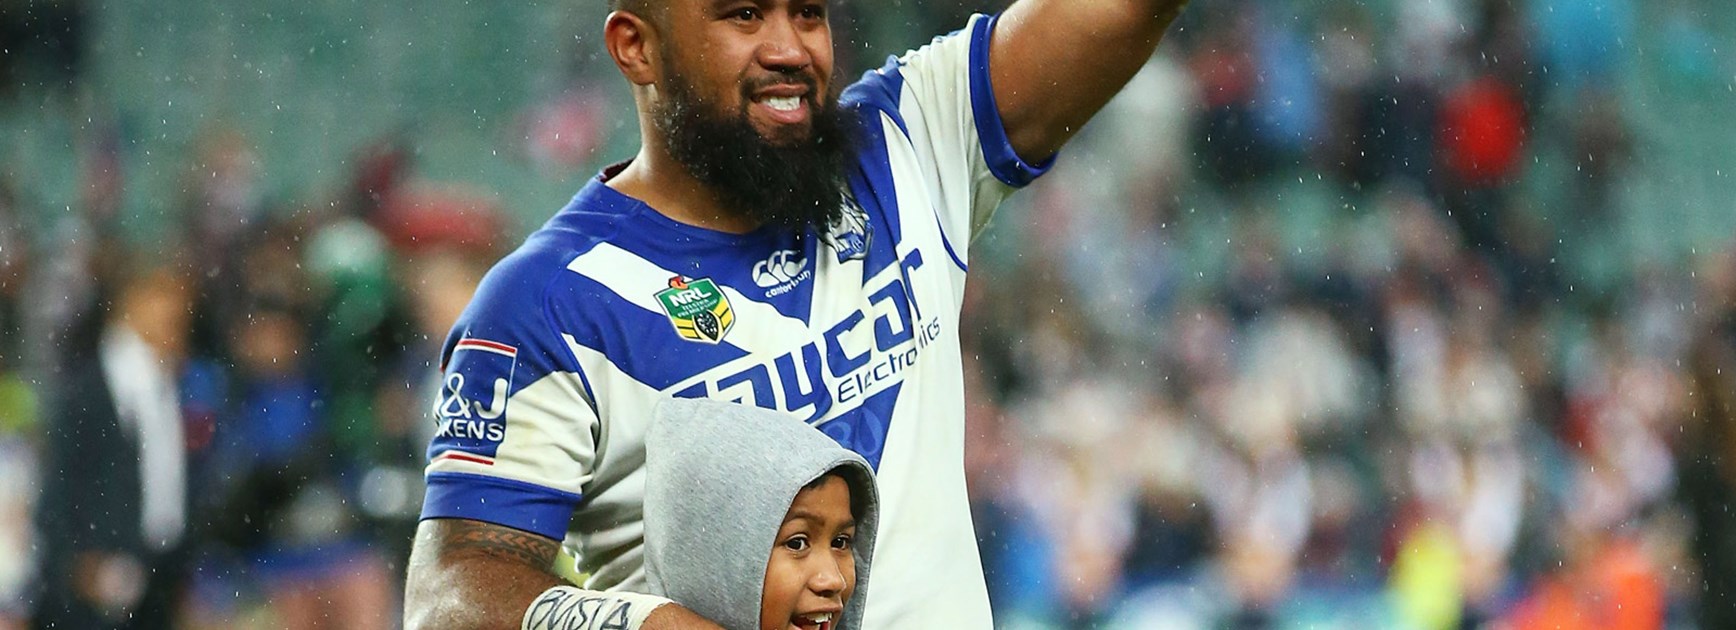 Frank Pritchard's Canterbury career came to an end as the Dogs lost the Roosters.